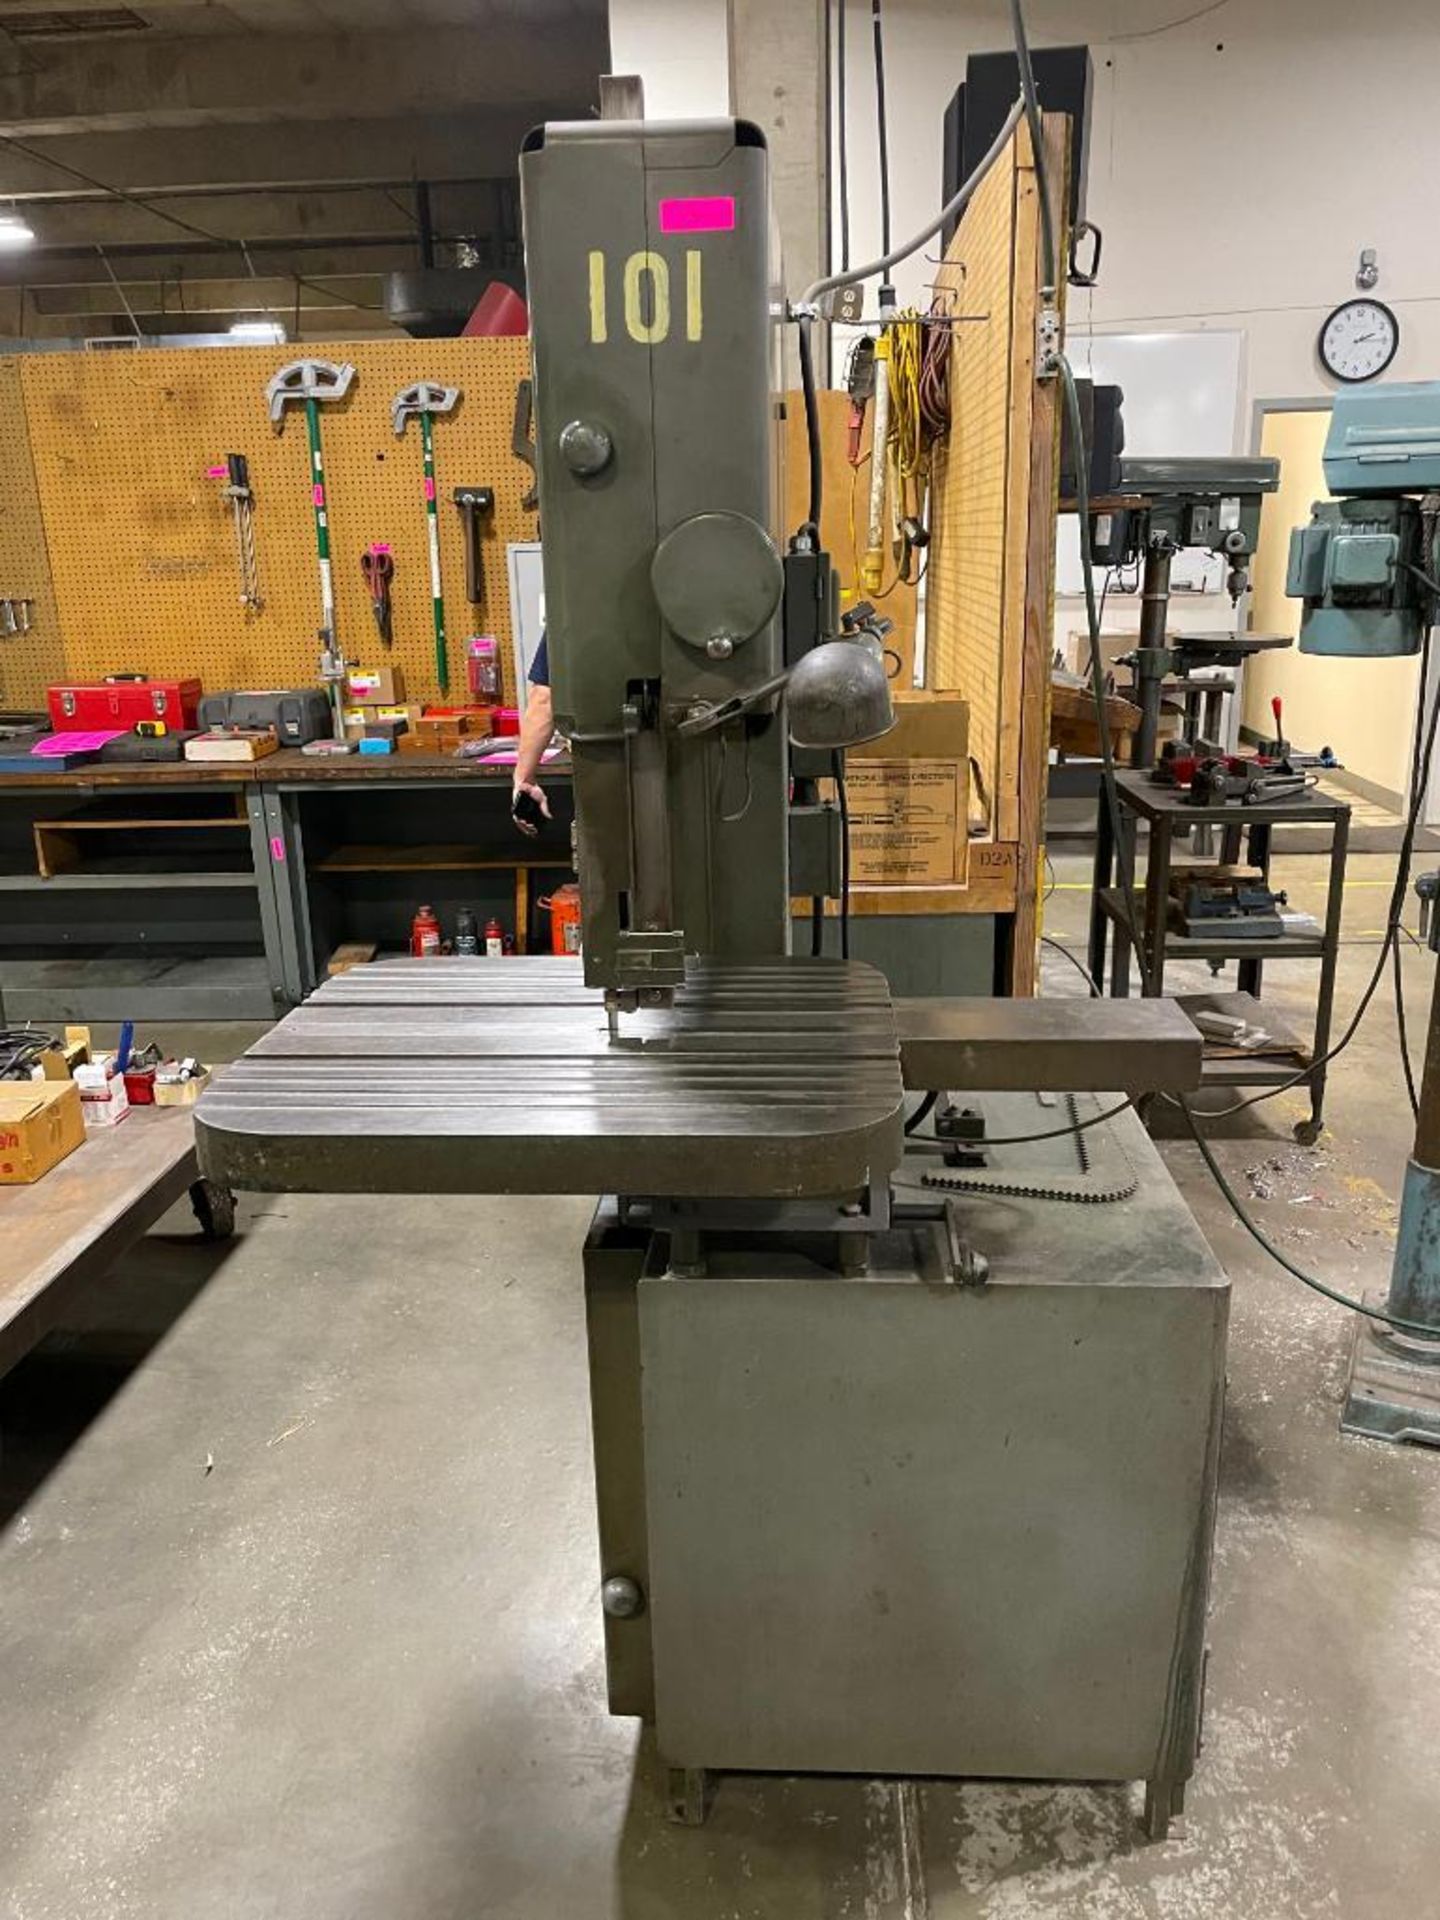 1969 GROB 4V-18 VERTICAL BAND SAW INFORMATION: 230V, 1 PHASE SIZE: 18"' LOCATION: WAREHOUSE QTY: 1 - Image 3 of 15